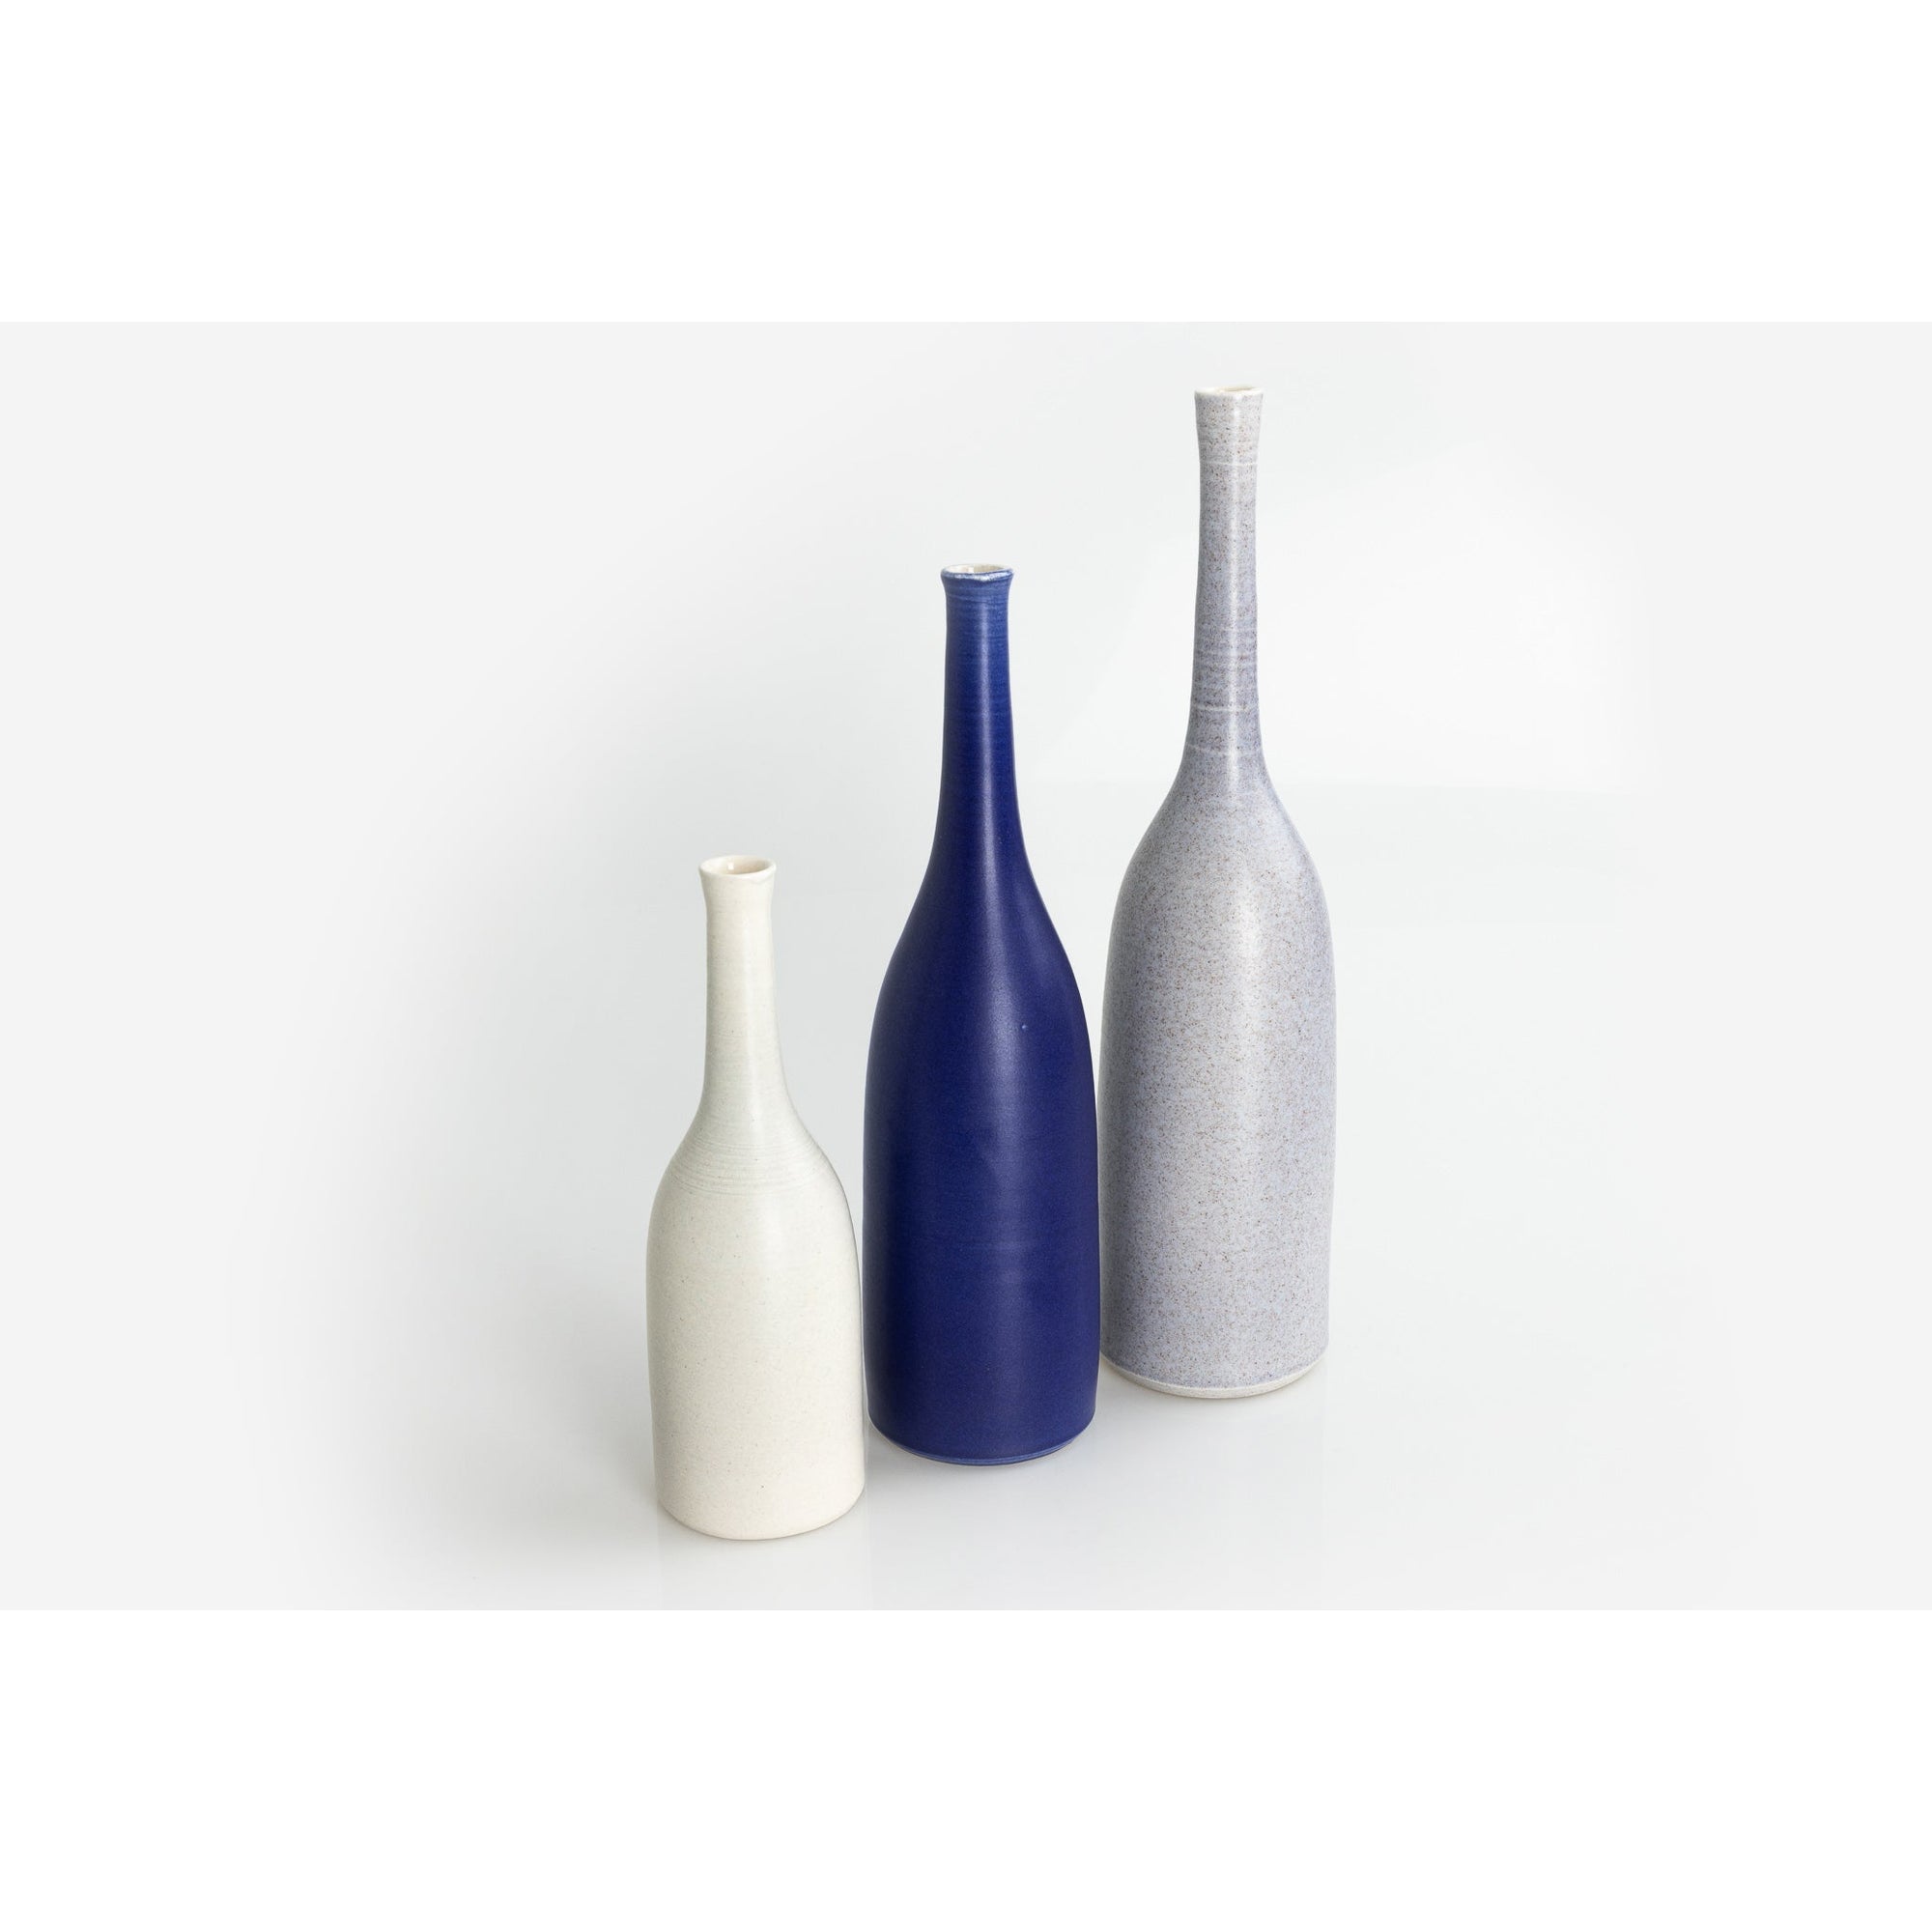 'LB148 French Grey Bottle' by Lucy Burley ceramics, available at Padstow Gallery, Cornwall